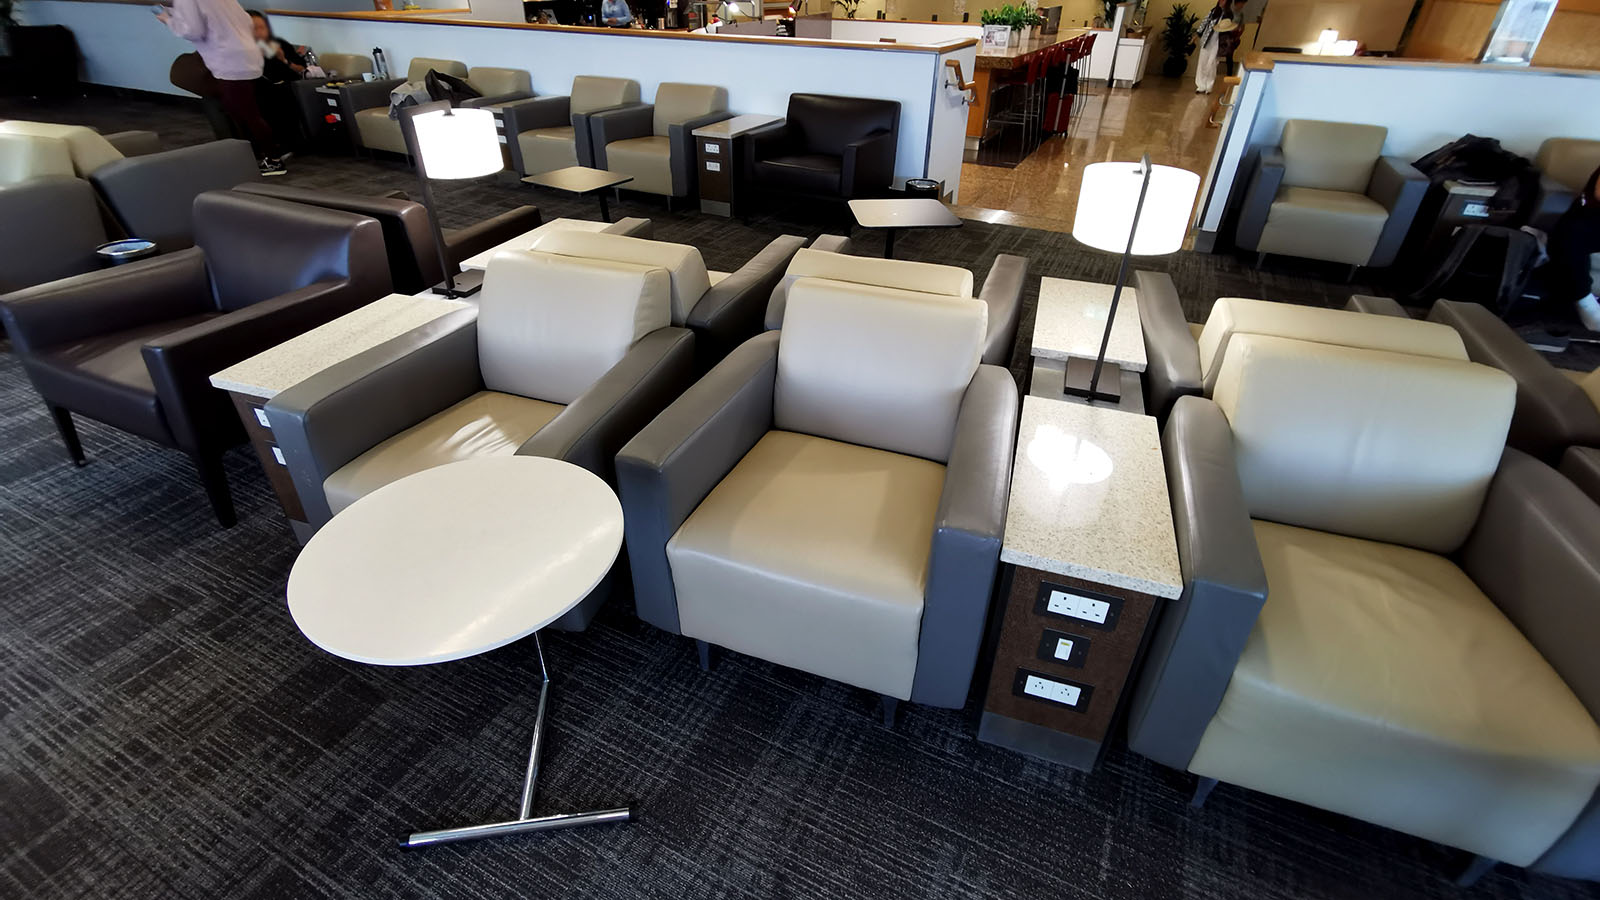 Personal sofas in the American Airlines International First Class Lounge, London Heathrow